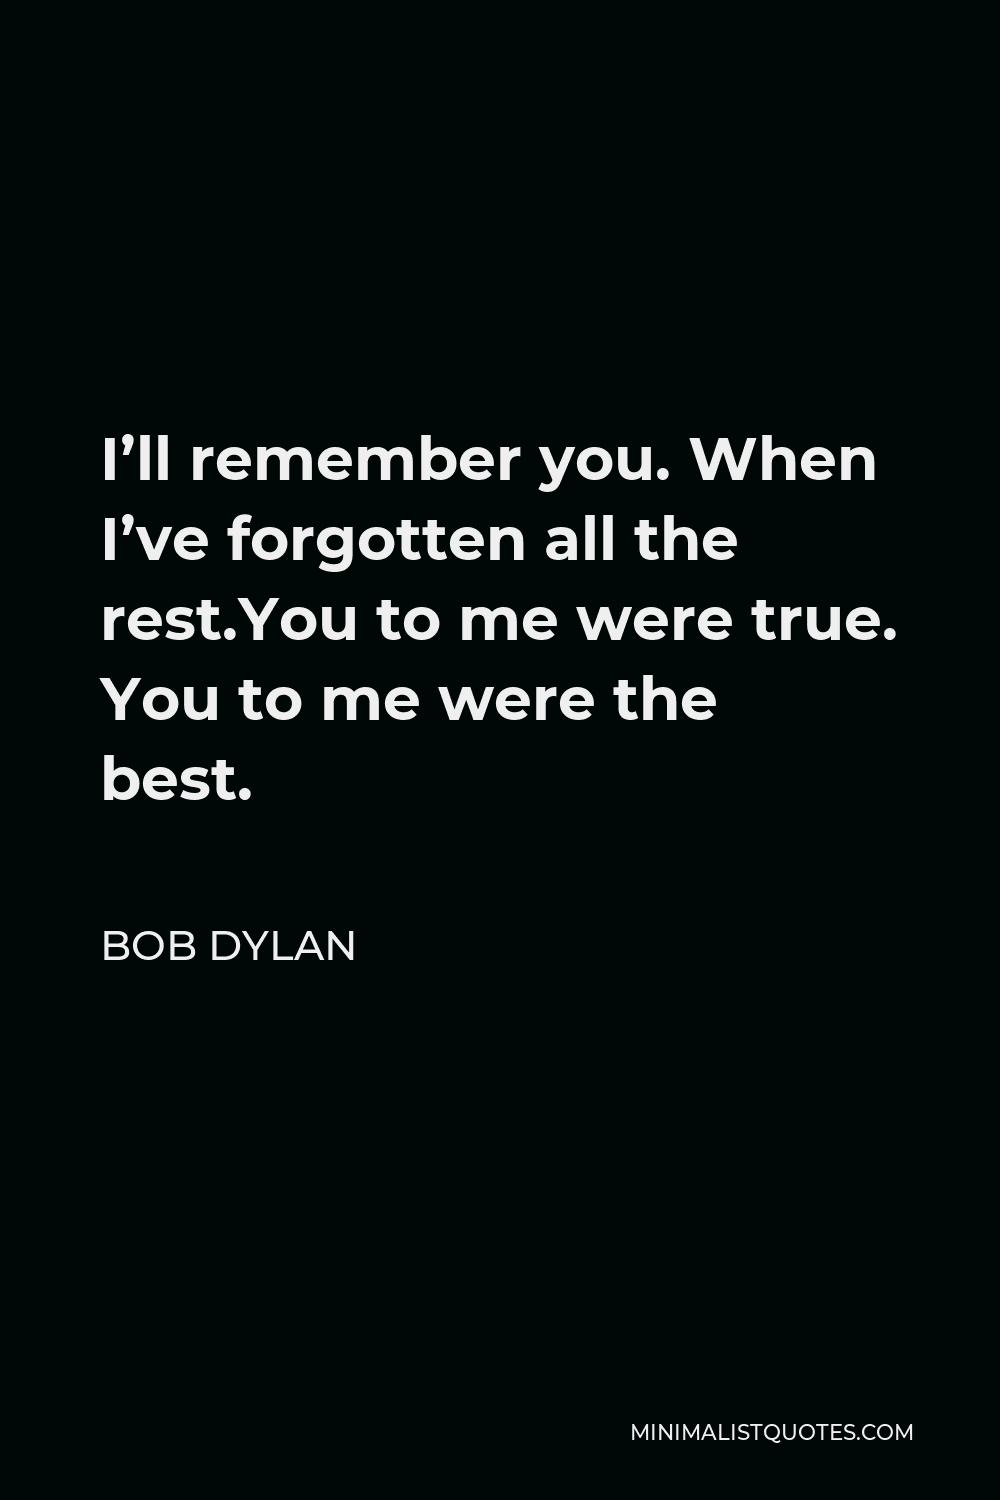 Bob Dylan Quote - I’ll remember you. When I’ve forgotten all the rest.You to me were true. You to me were the best.